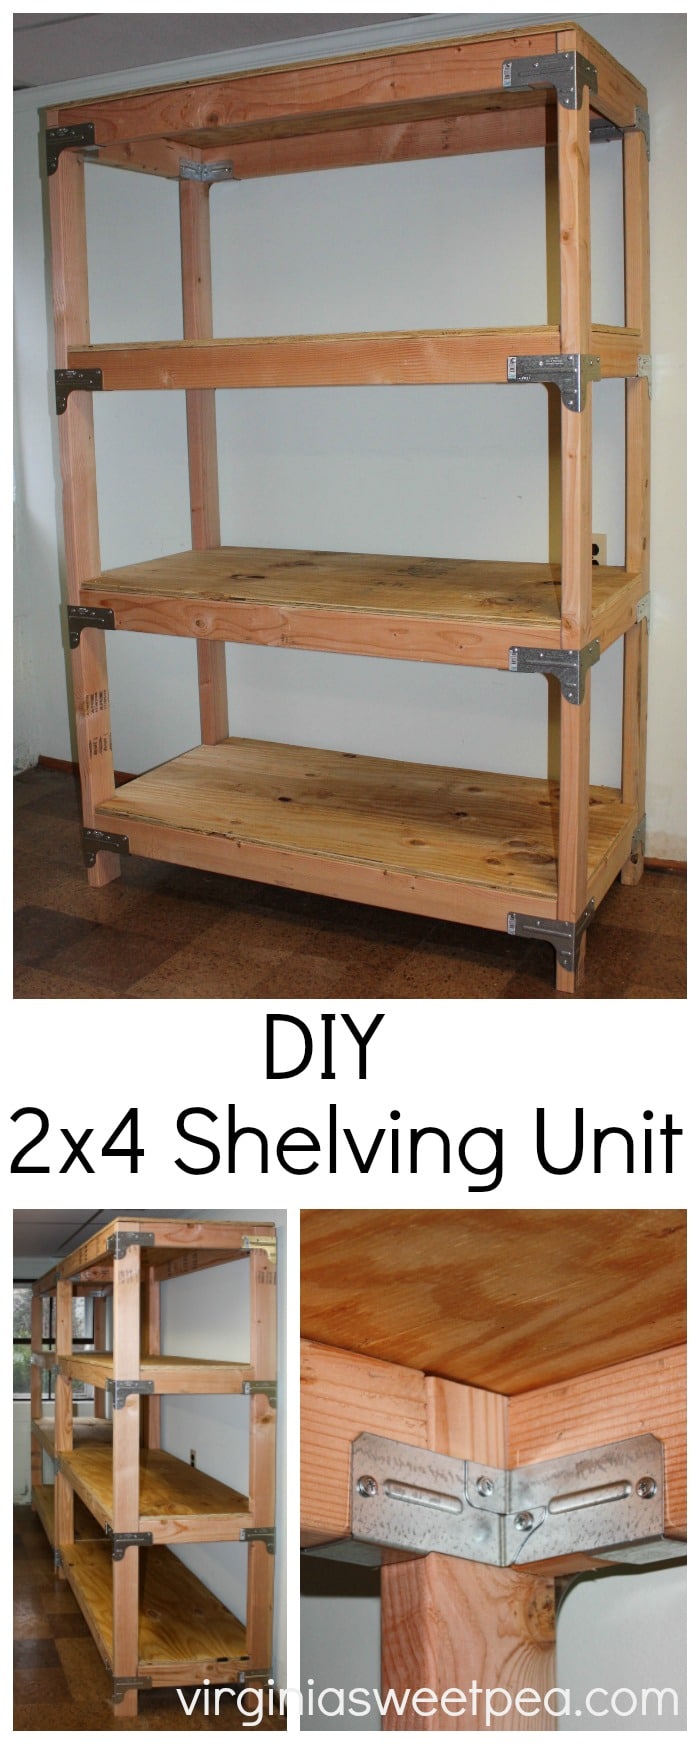 DIY 2x4 Shelving Unit - Learn how to make this useful piece for your home. virginiasweetpea.com